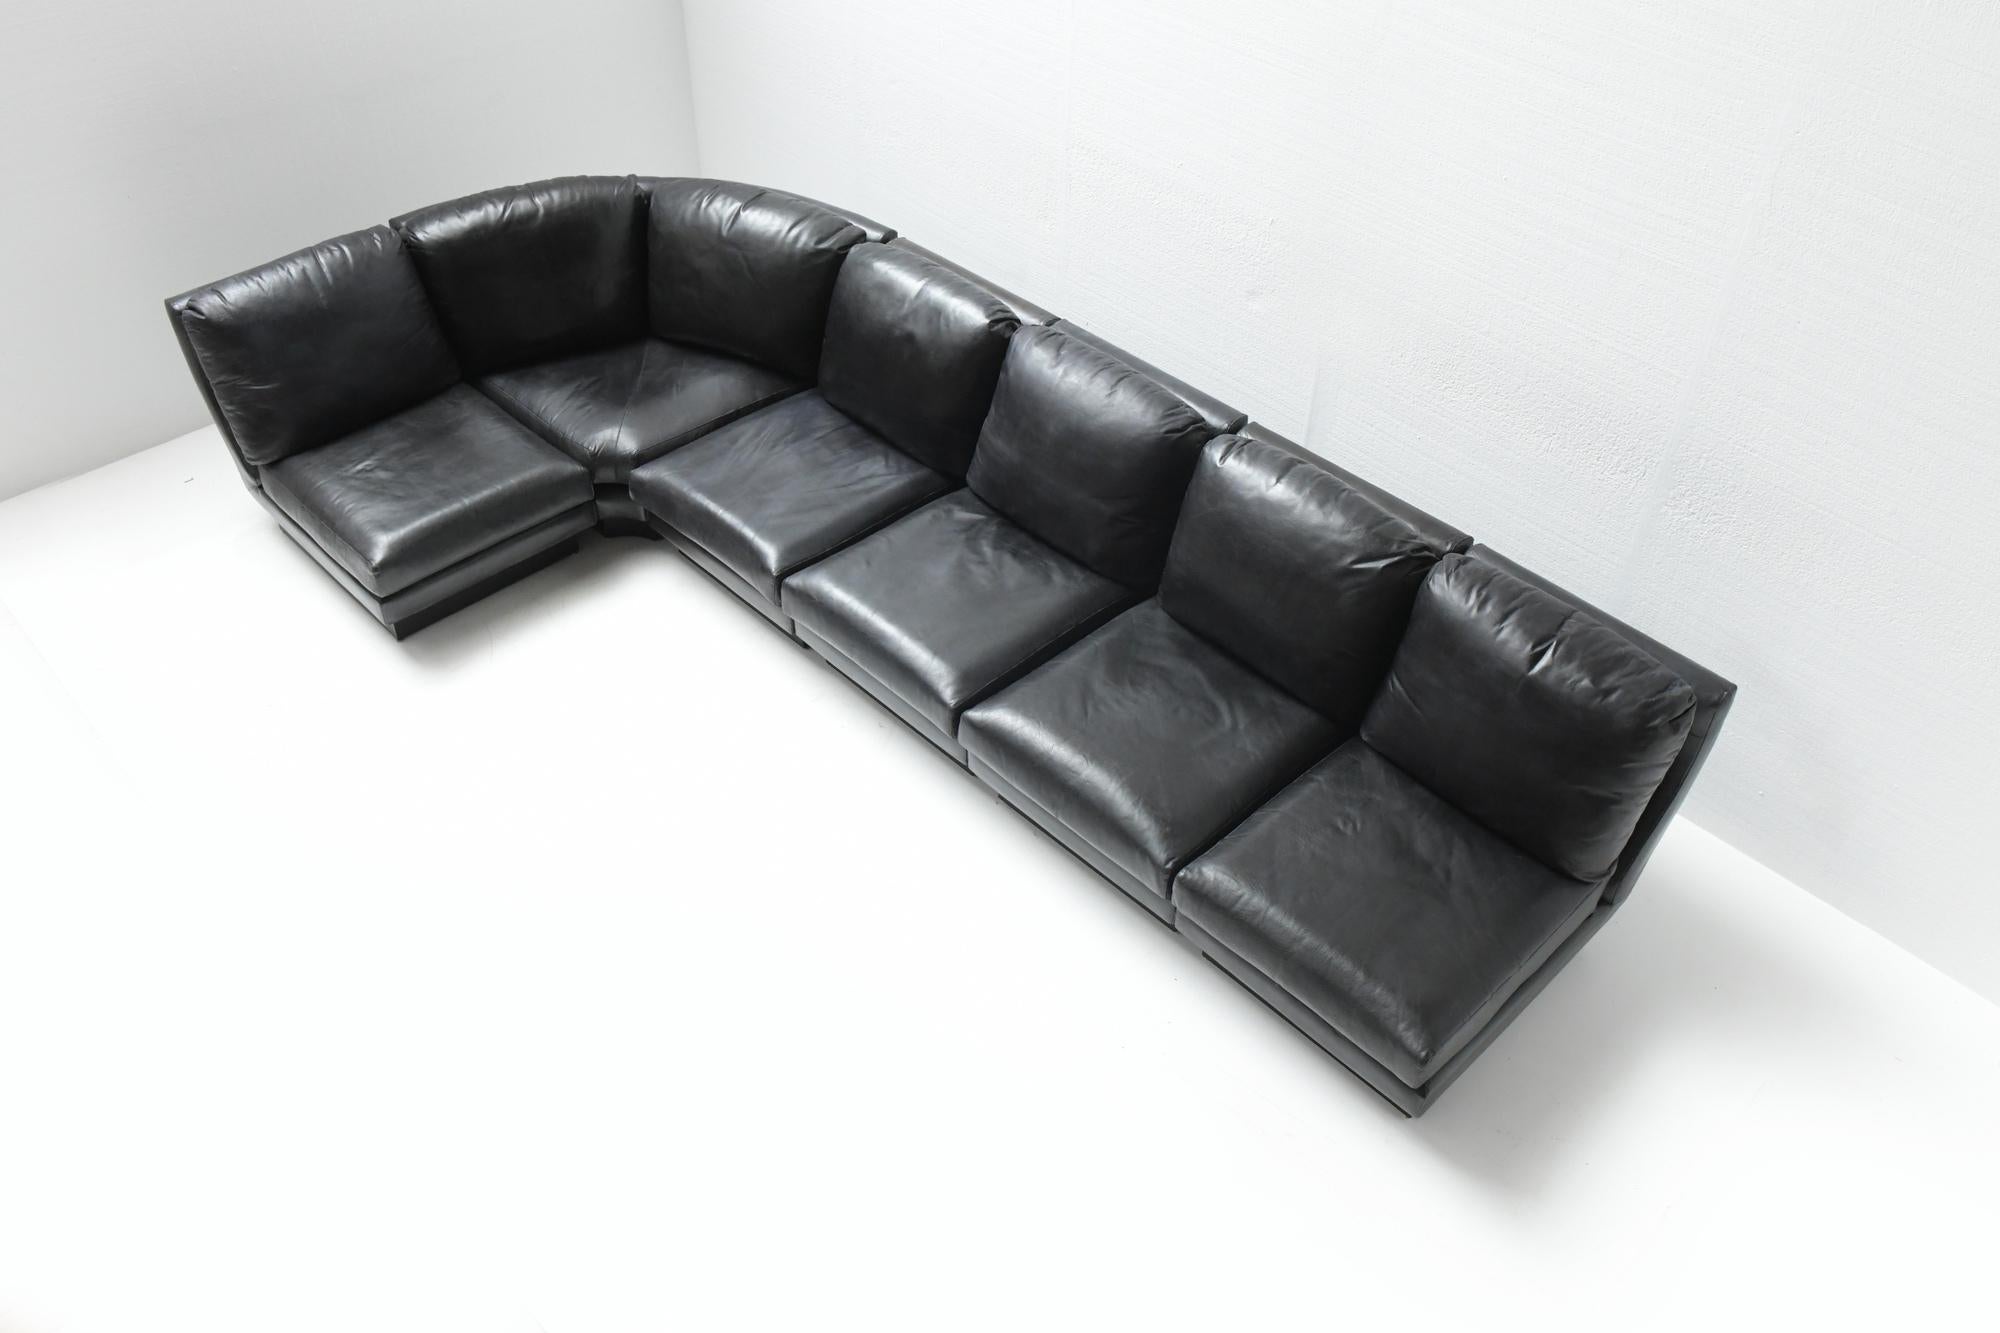 Rare Vintage Super C Modular Black Leather Sofa  by Willy Rizzo Italy In Fair Condition For Sale In Buggenhout, Oost-Vlaanderen